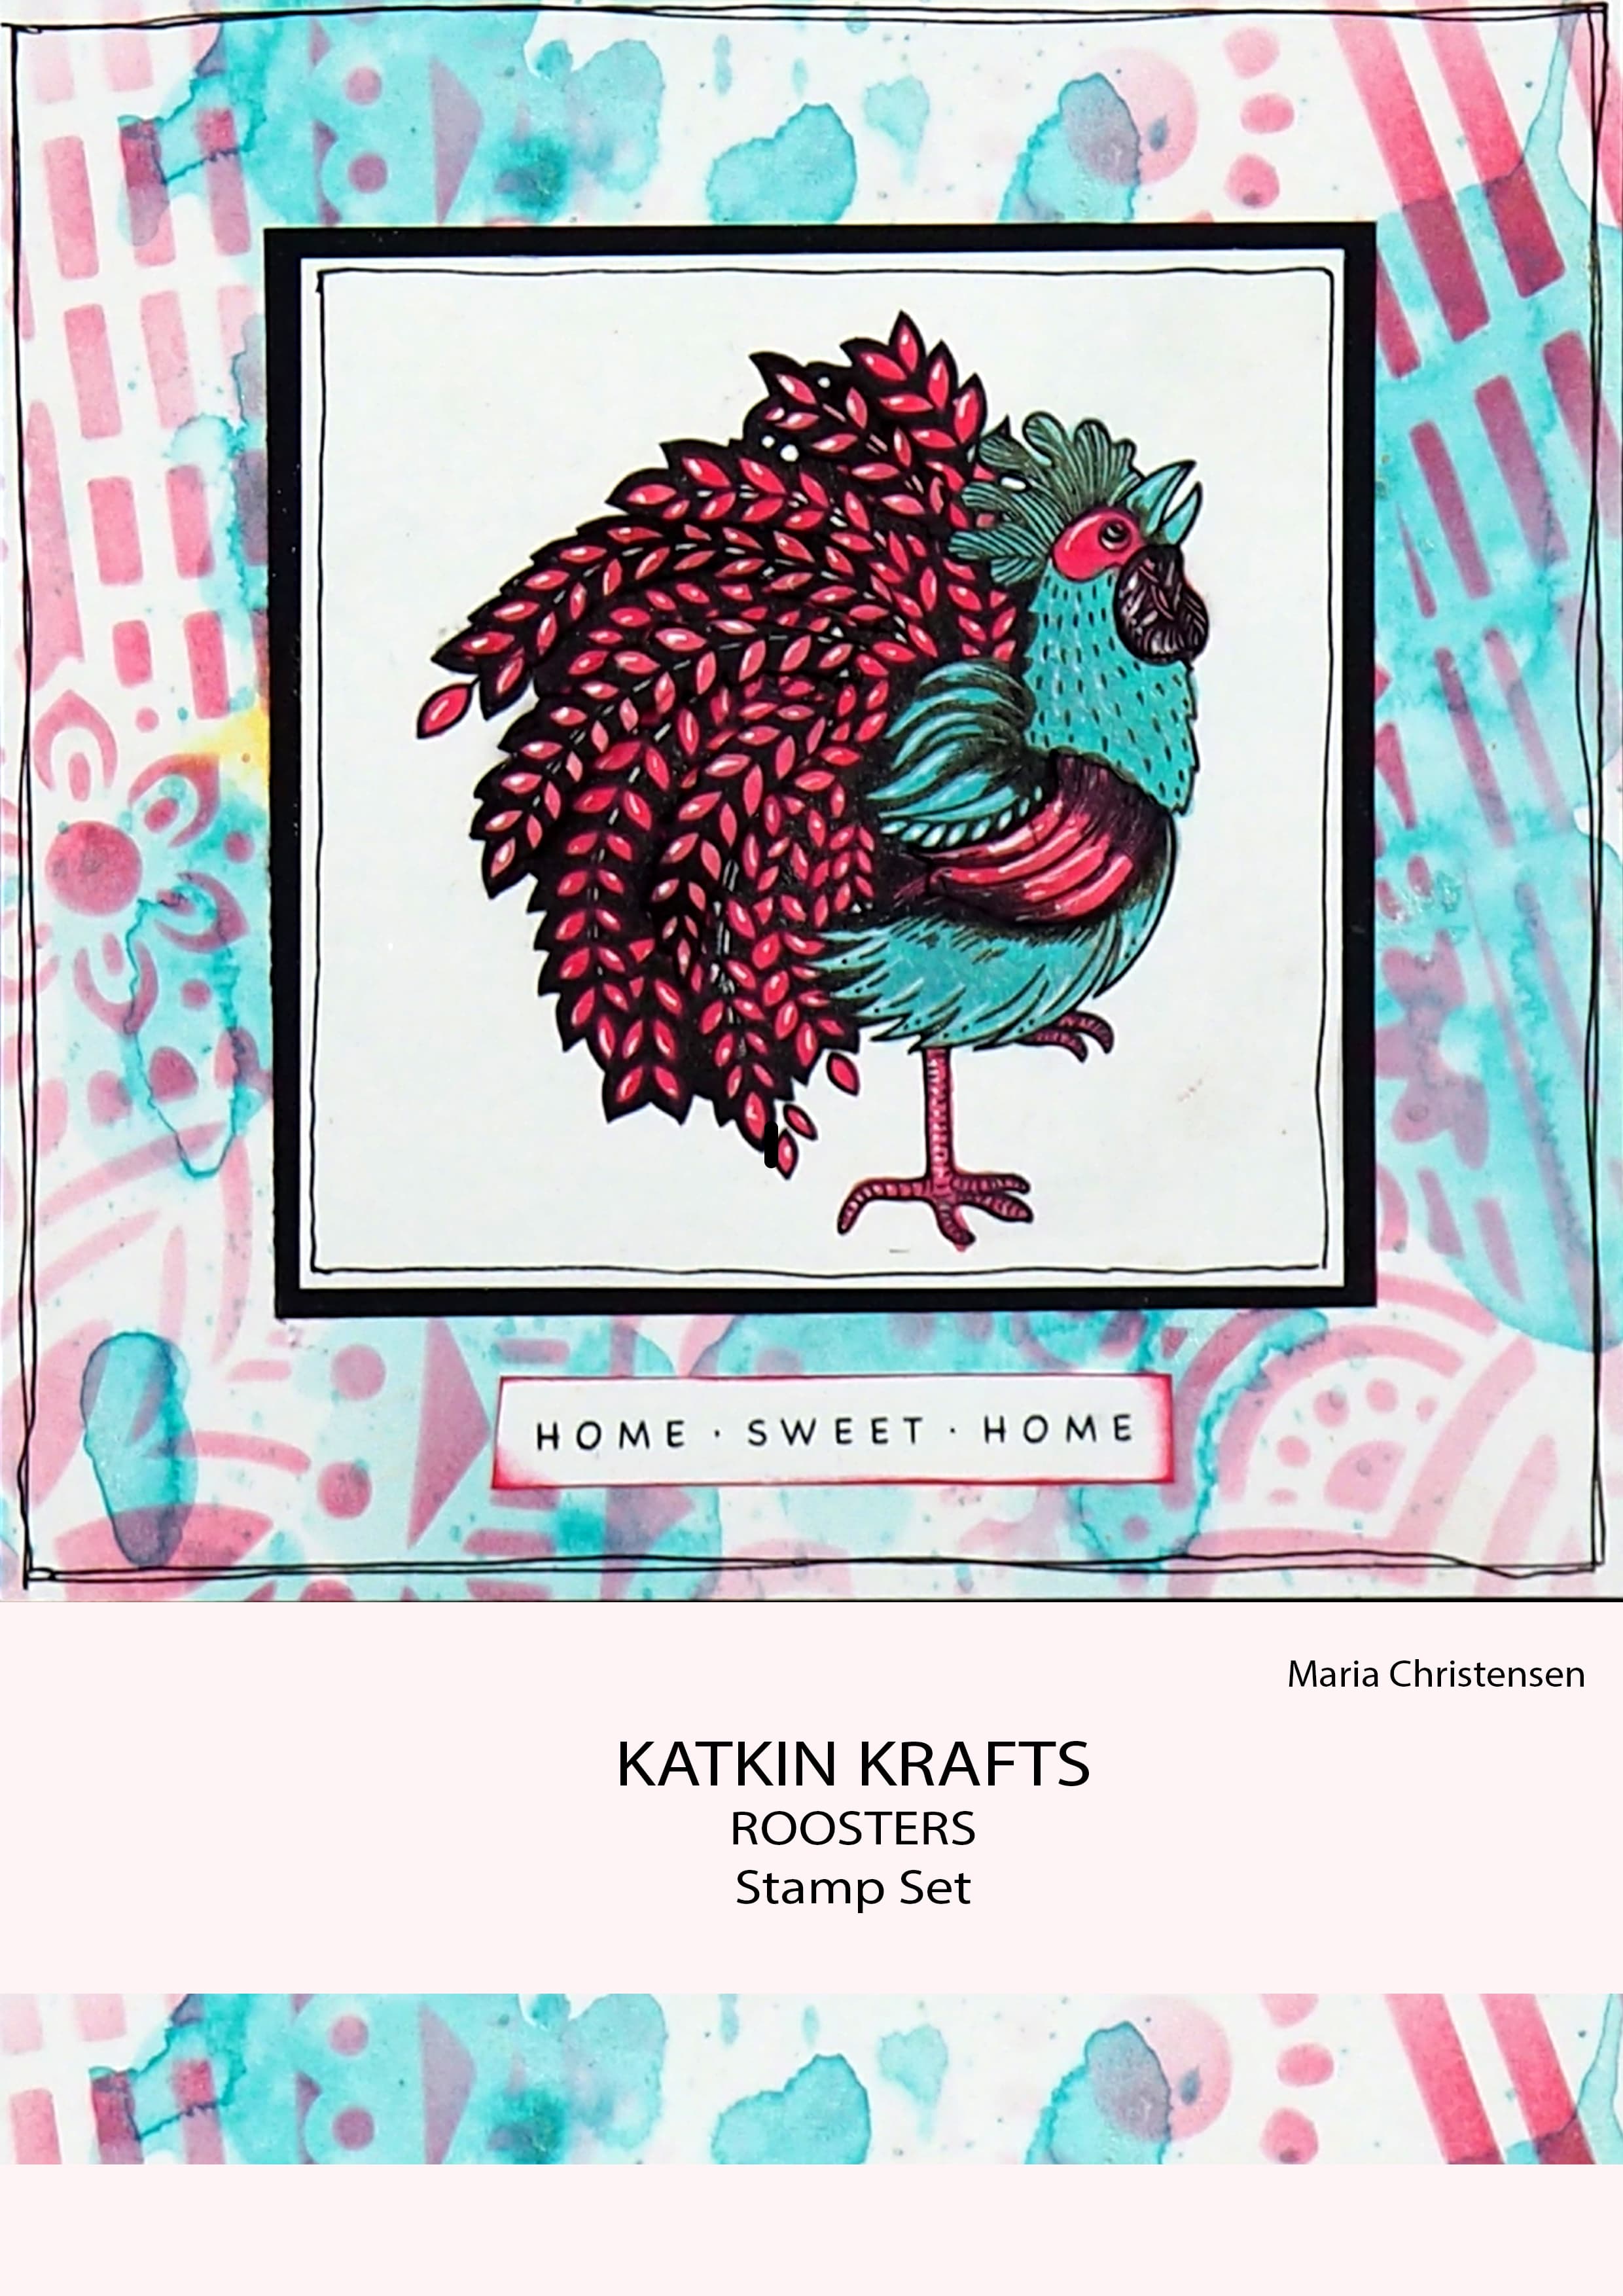 Katkin Krafts The Roosters 6 in x 8 in Clear Stamp Set